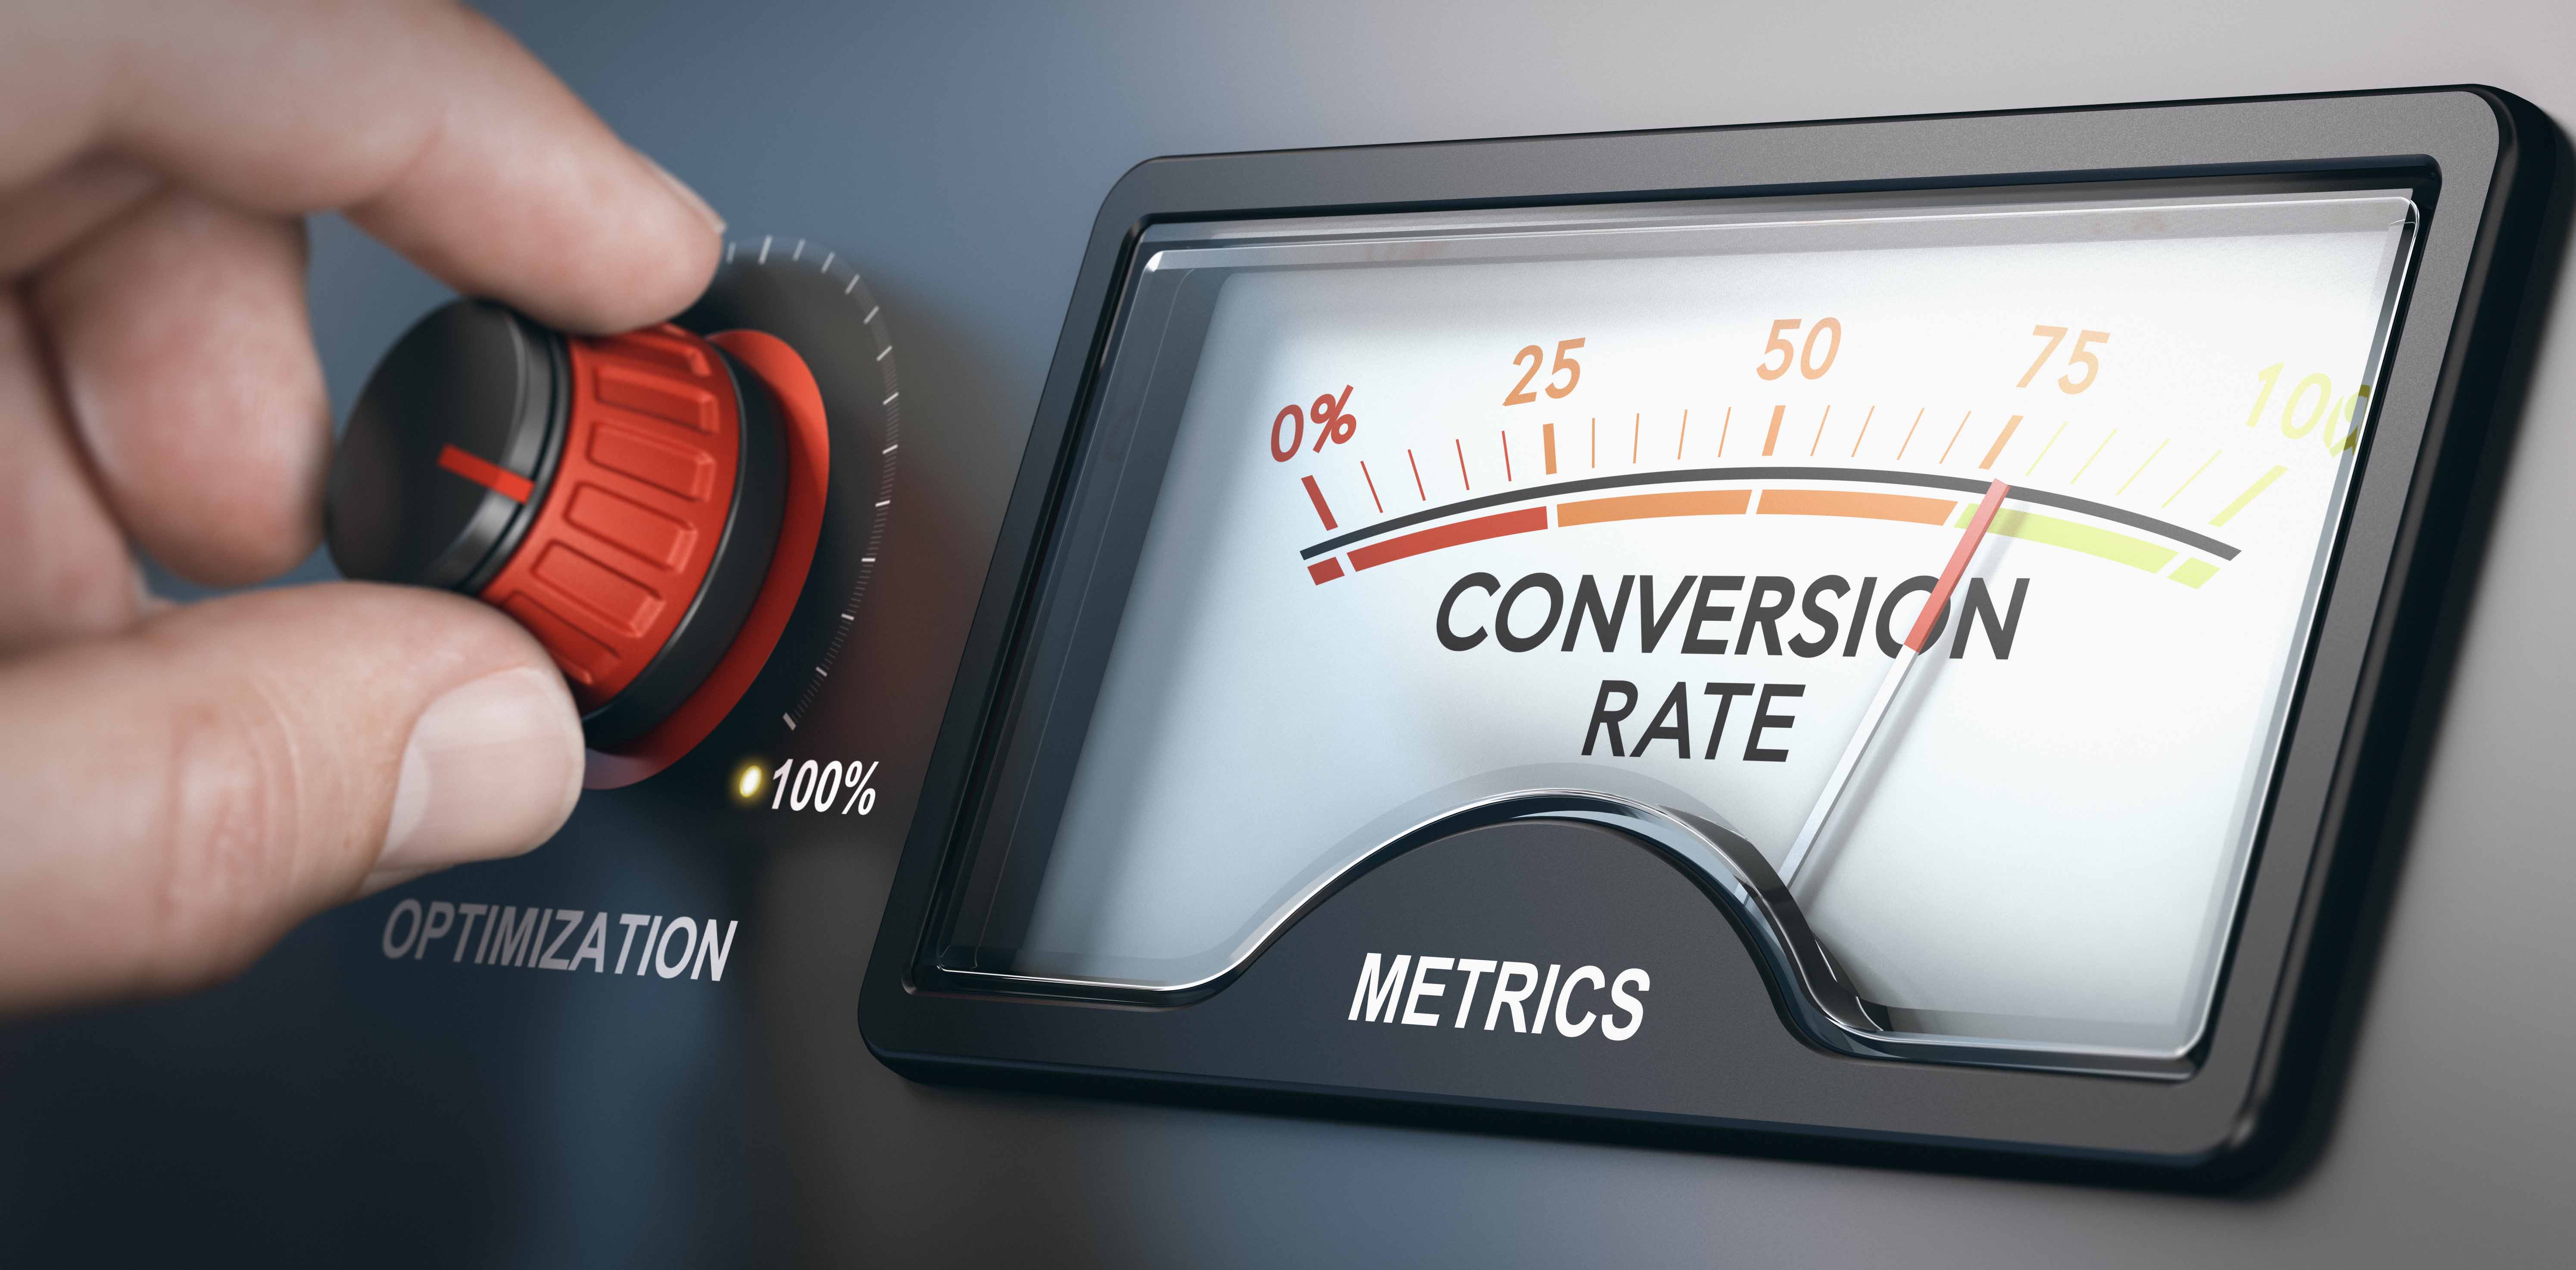 Conversion Rate Optimization: What Does It Do? How Does It Help?